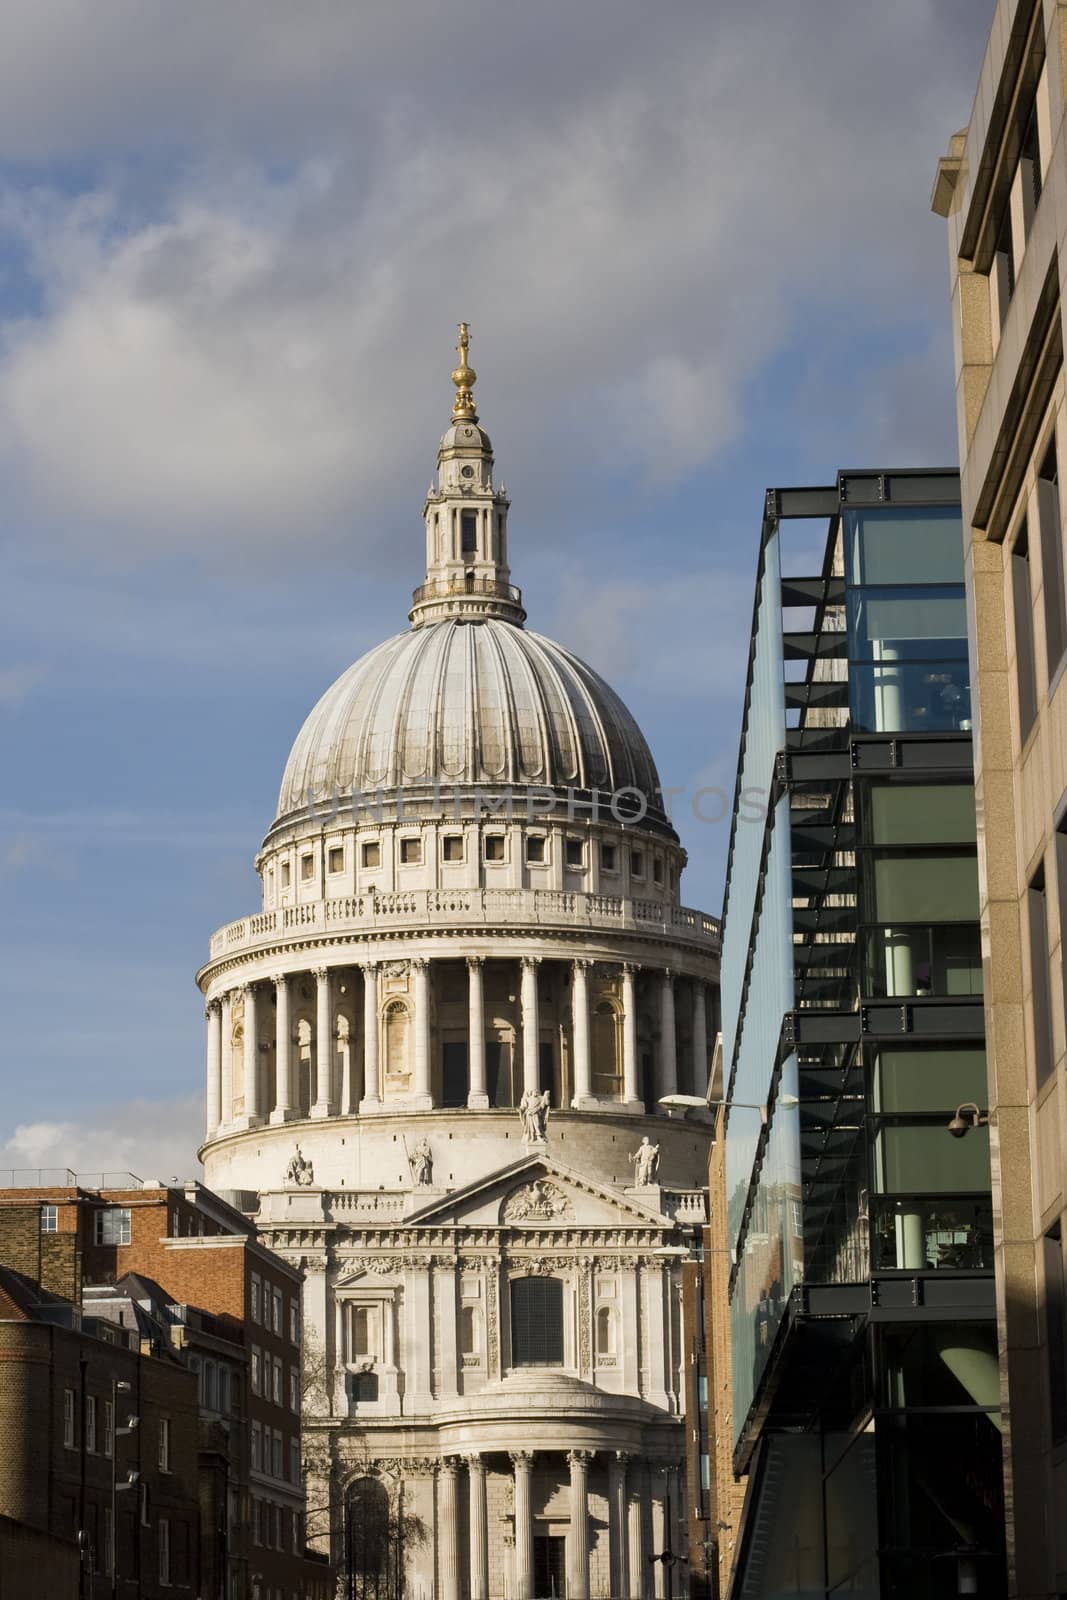 St. Pauls Cathedral is the most famous cathedral here in London, and the seat of the Bishop of London.